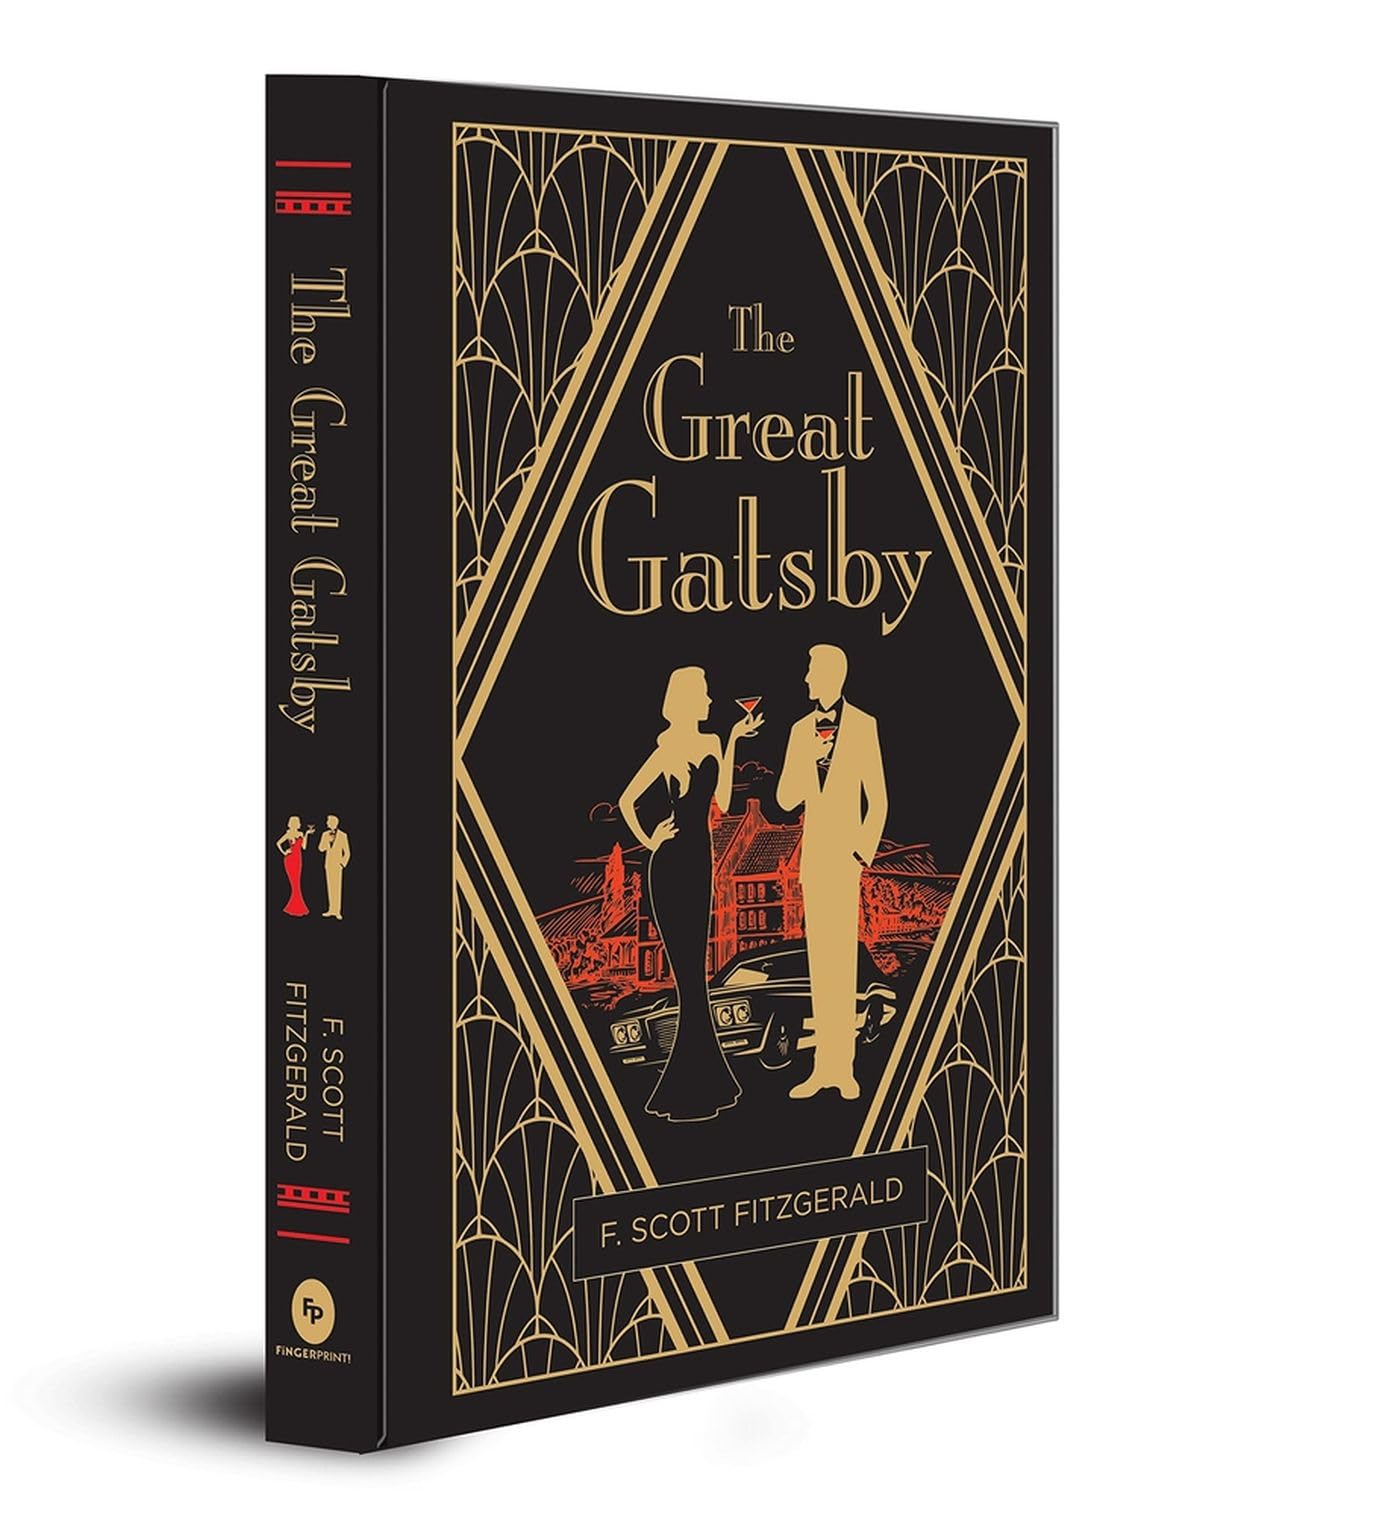 The Great Gatsby (Deluxe Hardbound Edition) by Fitzgerald, F. Scott